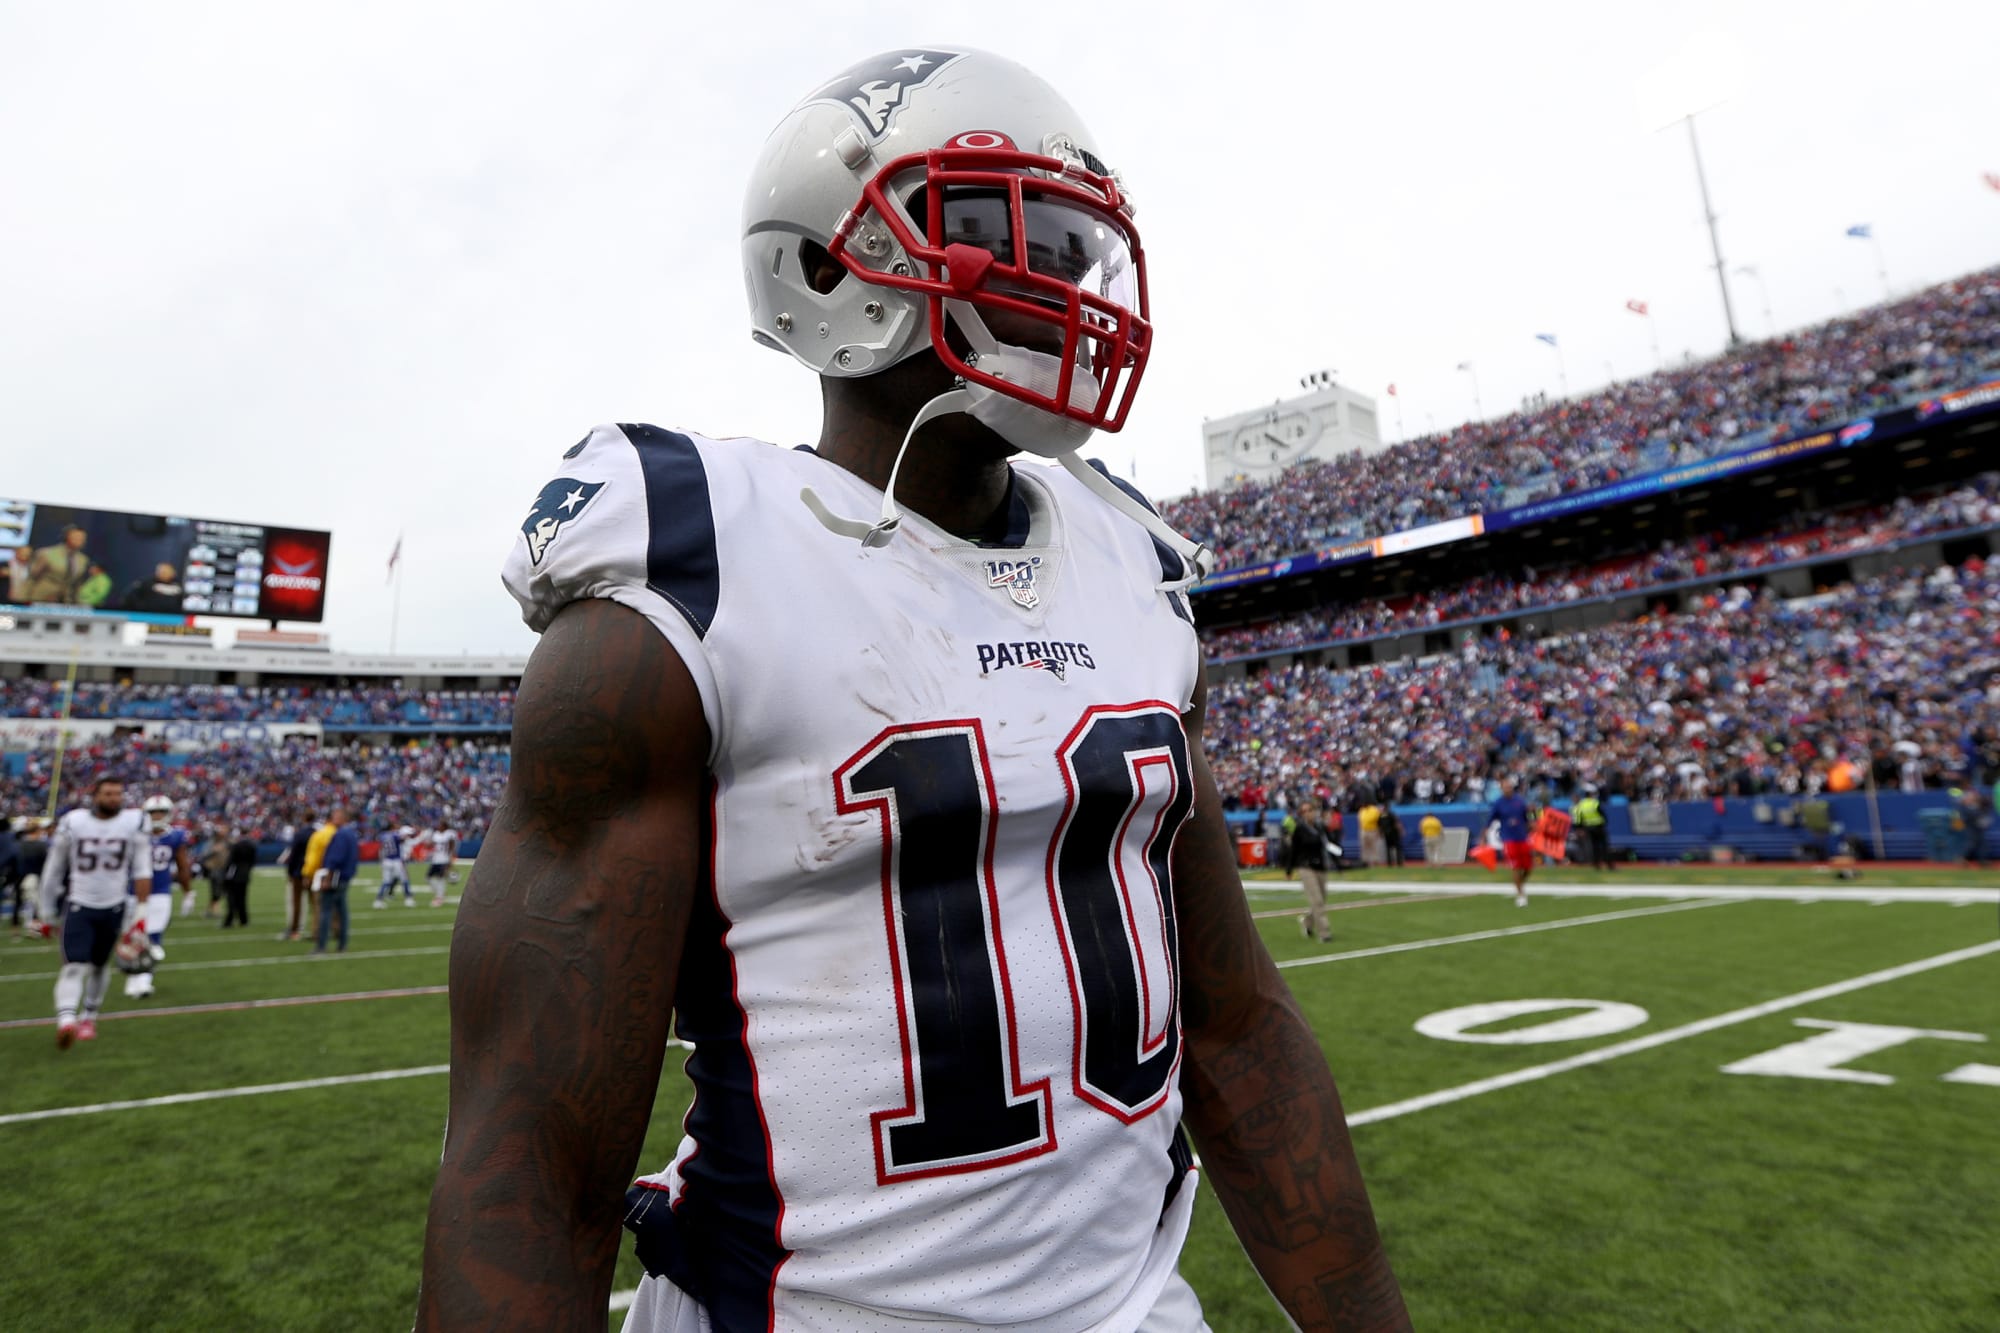 Josh Gordon’s Patriots Super Bowl ring up for auction at expensive price